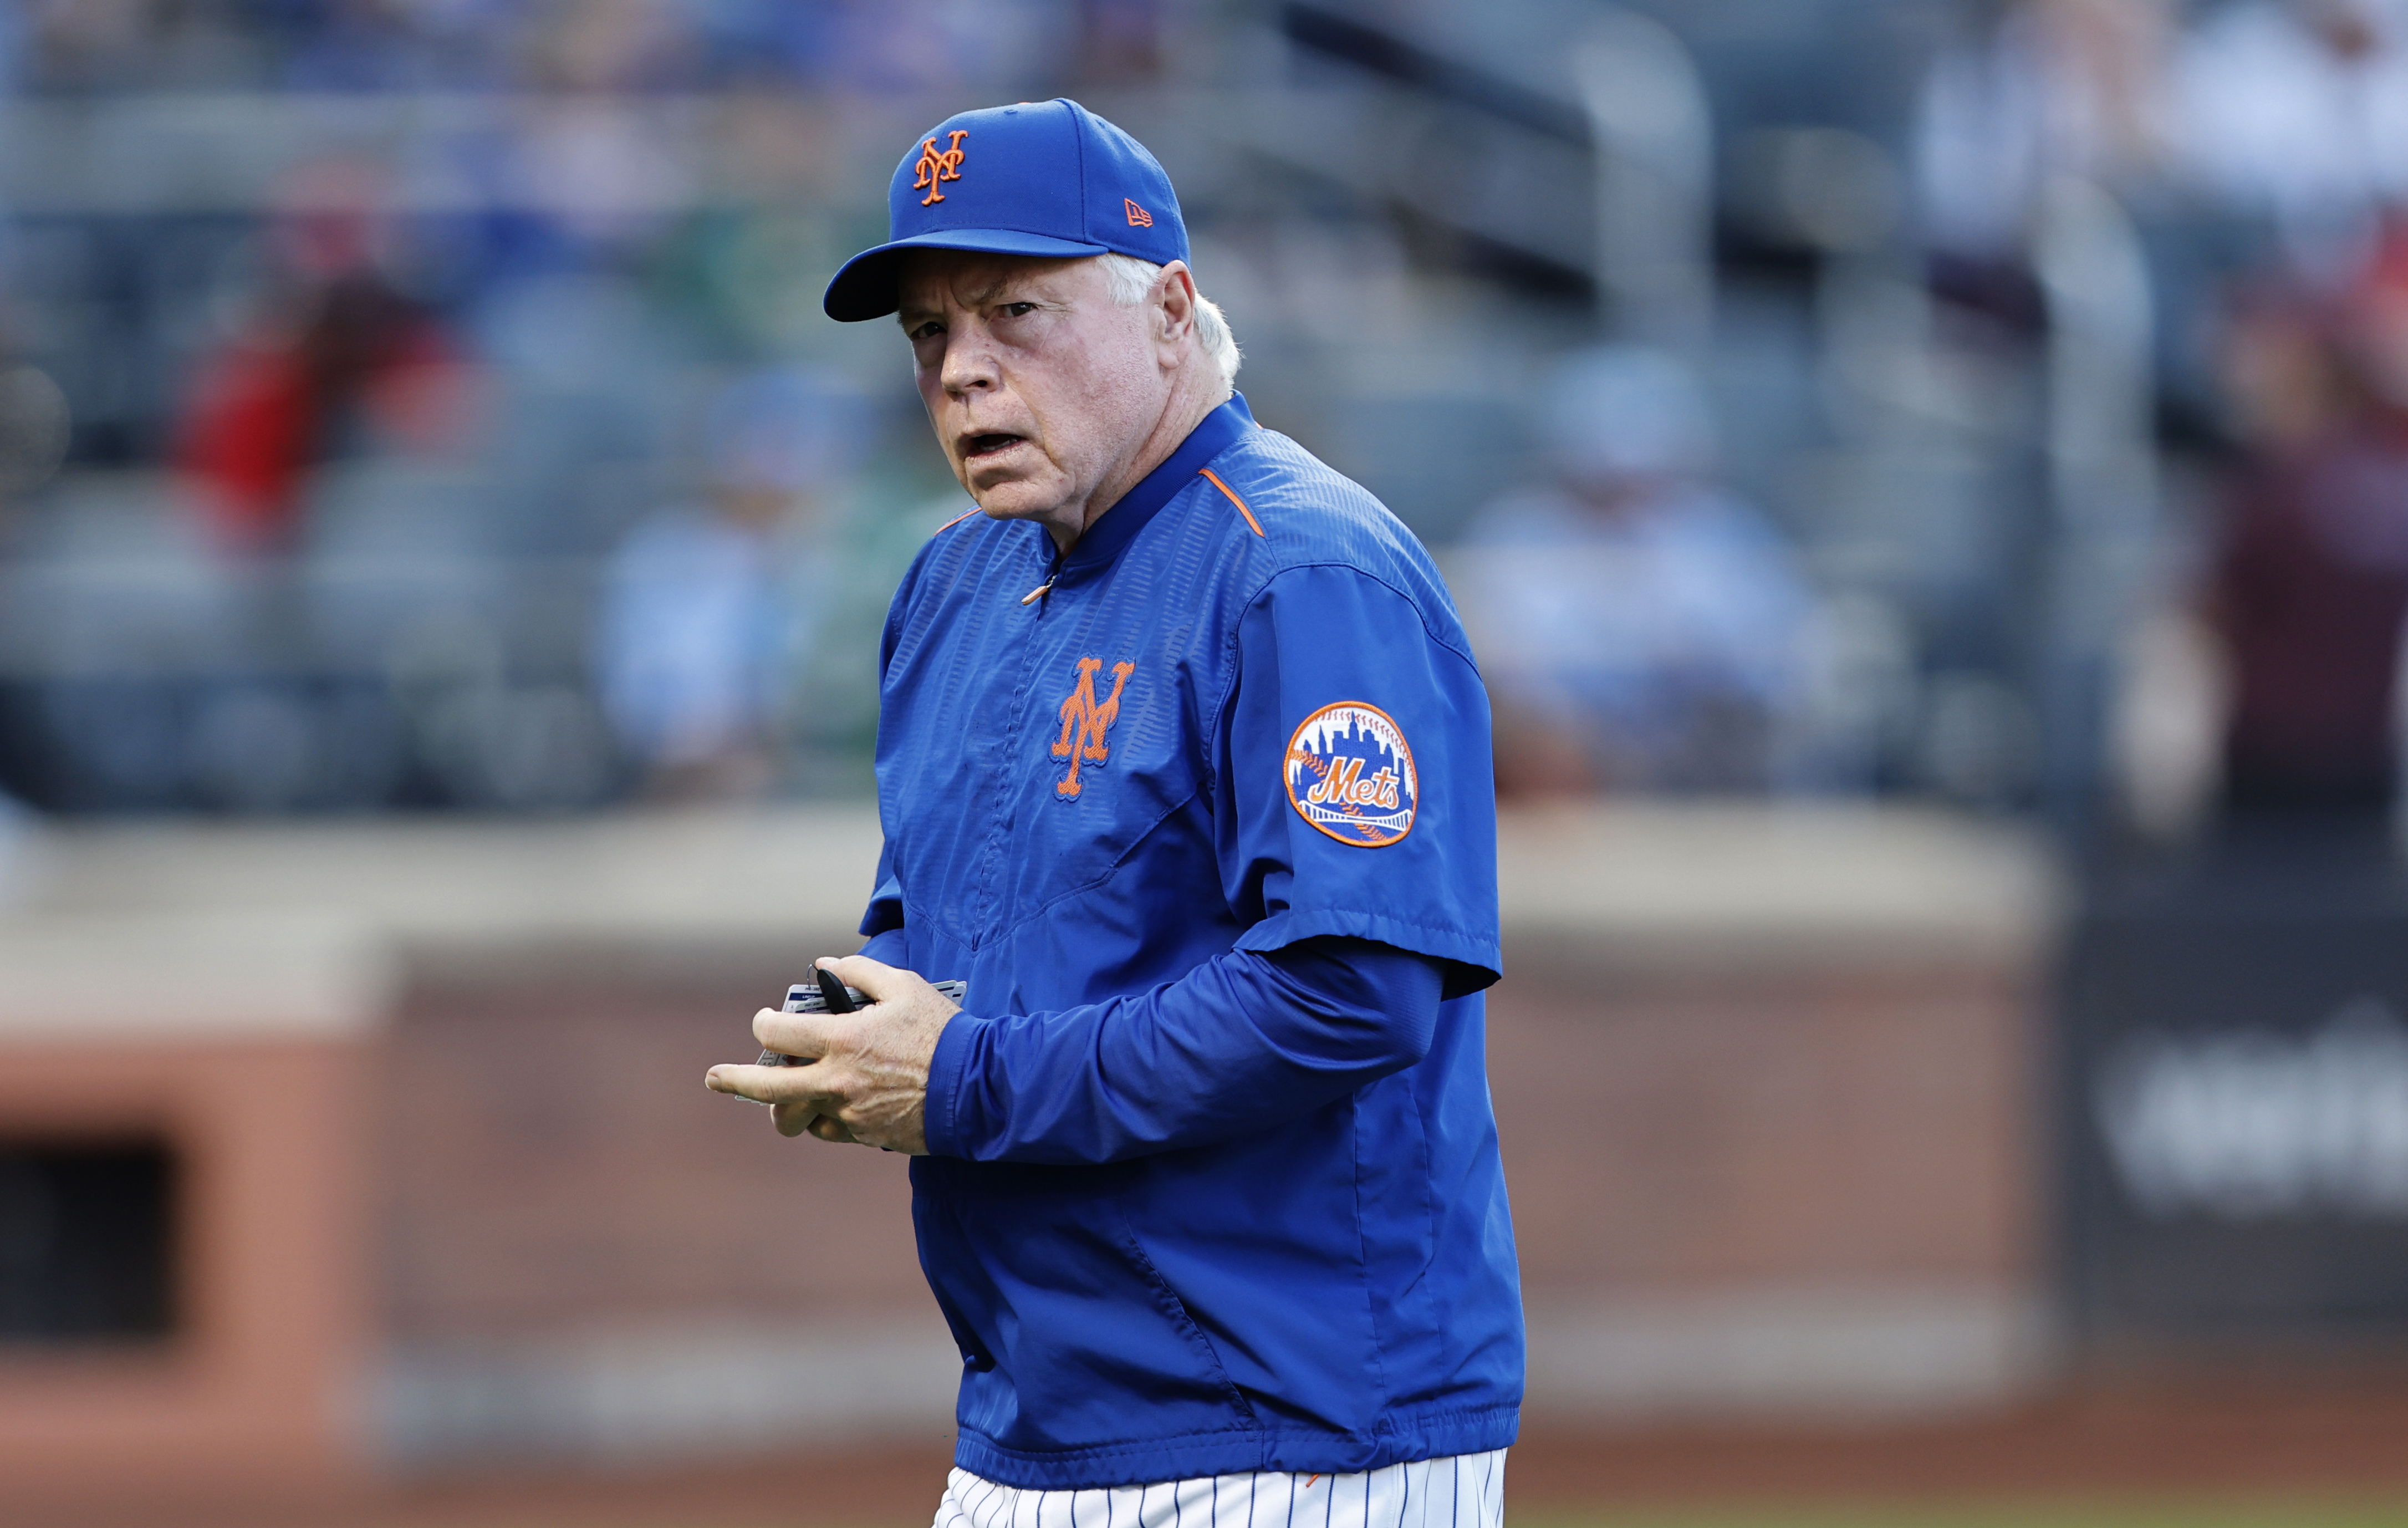 Astros cheating scandal: Carlos Beltran in odd spot as Mets manager